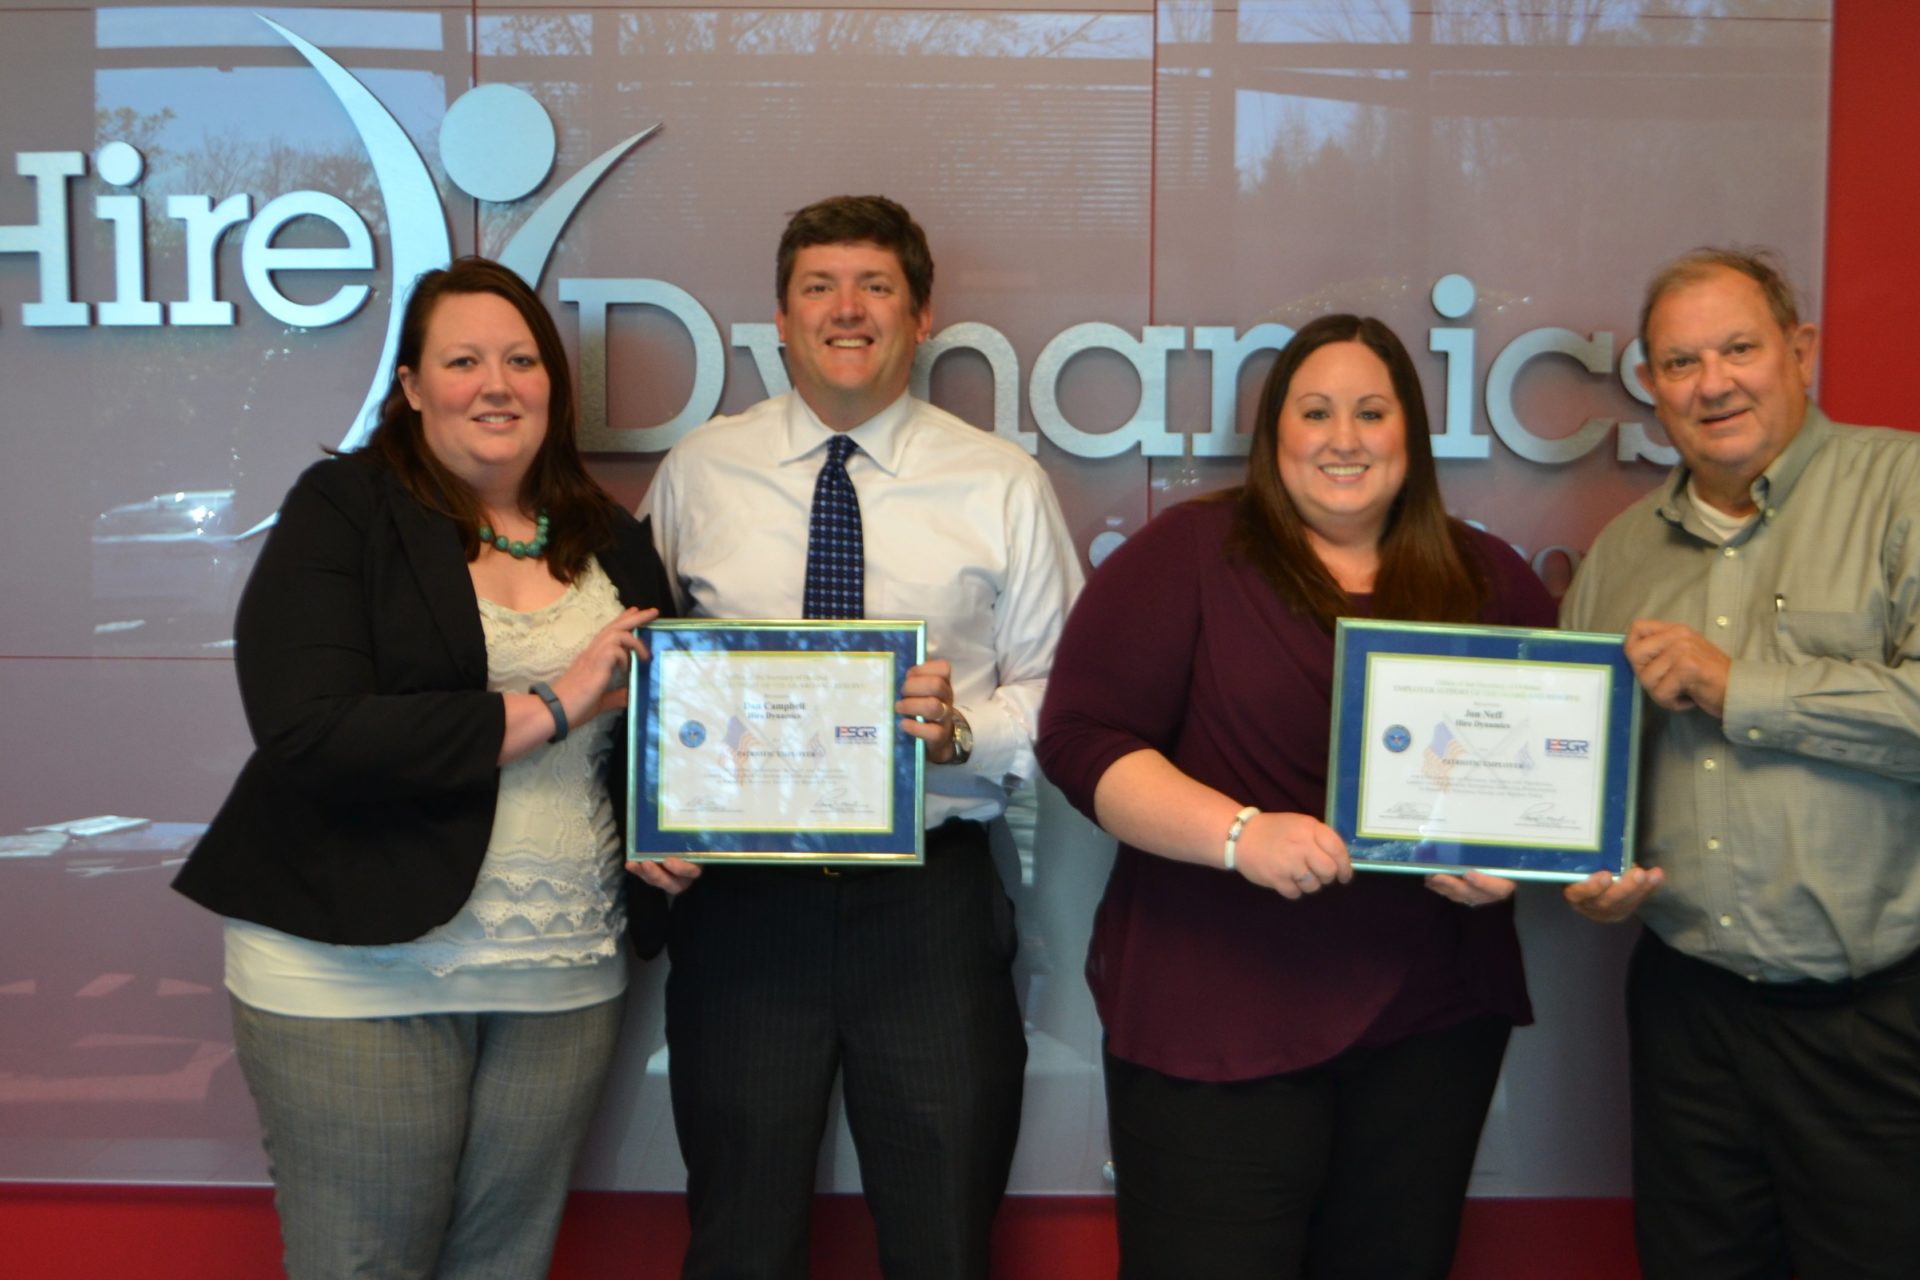 Jasmine Bean staffing specialist, Alpharetta Branch, Dan Campbell CEO of Hire Dynamics, Kristy Jones Branch Manager, Alpharetta Branch and Joel Seymour who presented the award. 